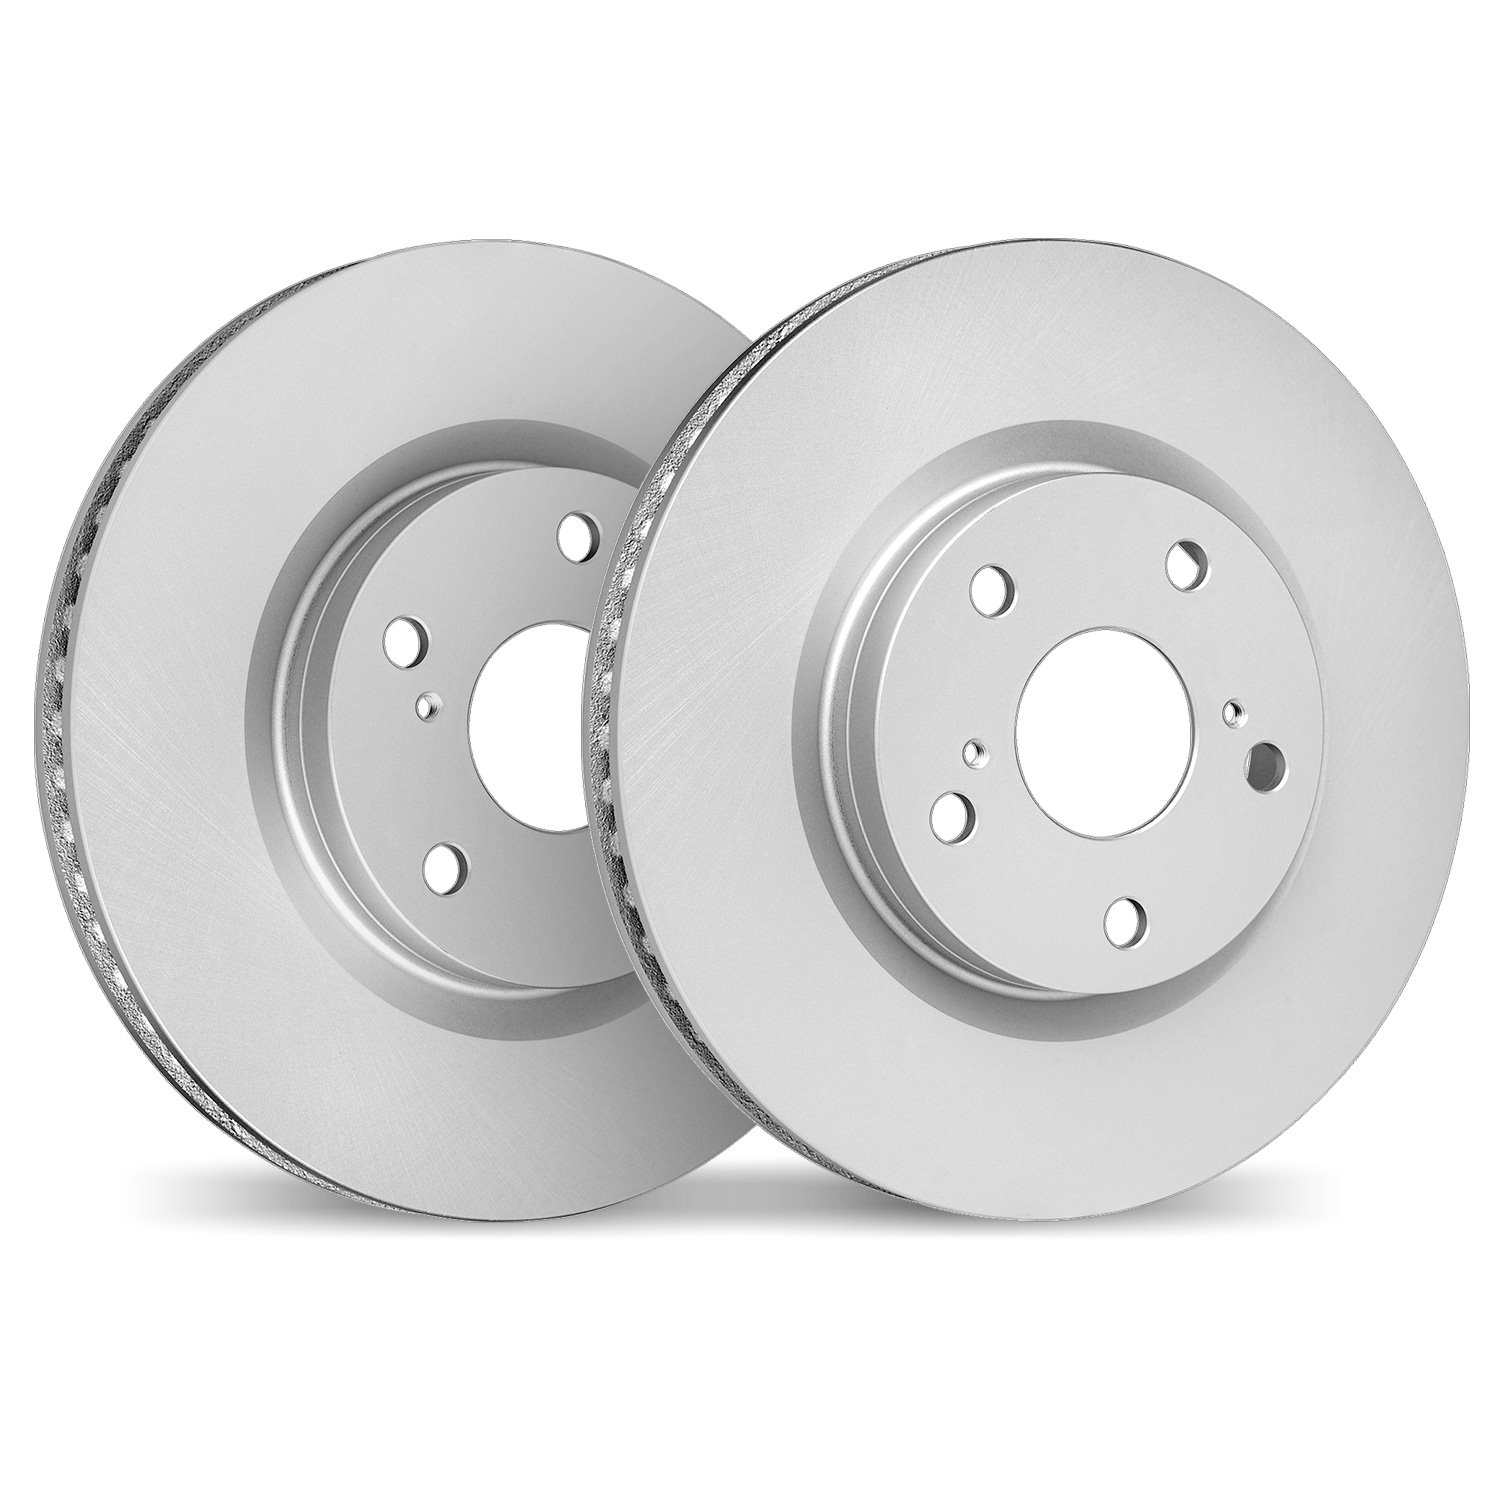 4002-54185 Geospec Brake Rotors, Fits Select Ford/Lincoln/Mercury/Mazda, Position: Front